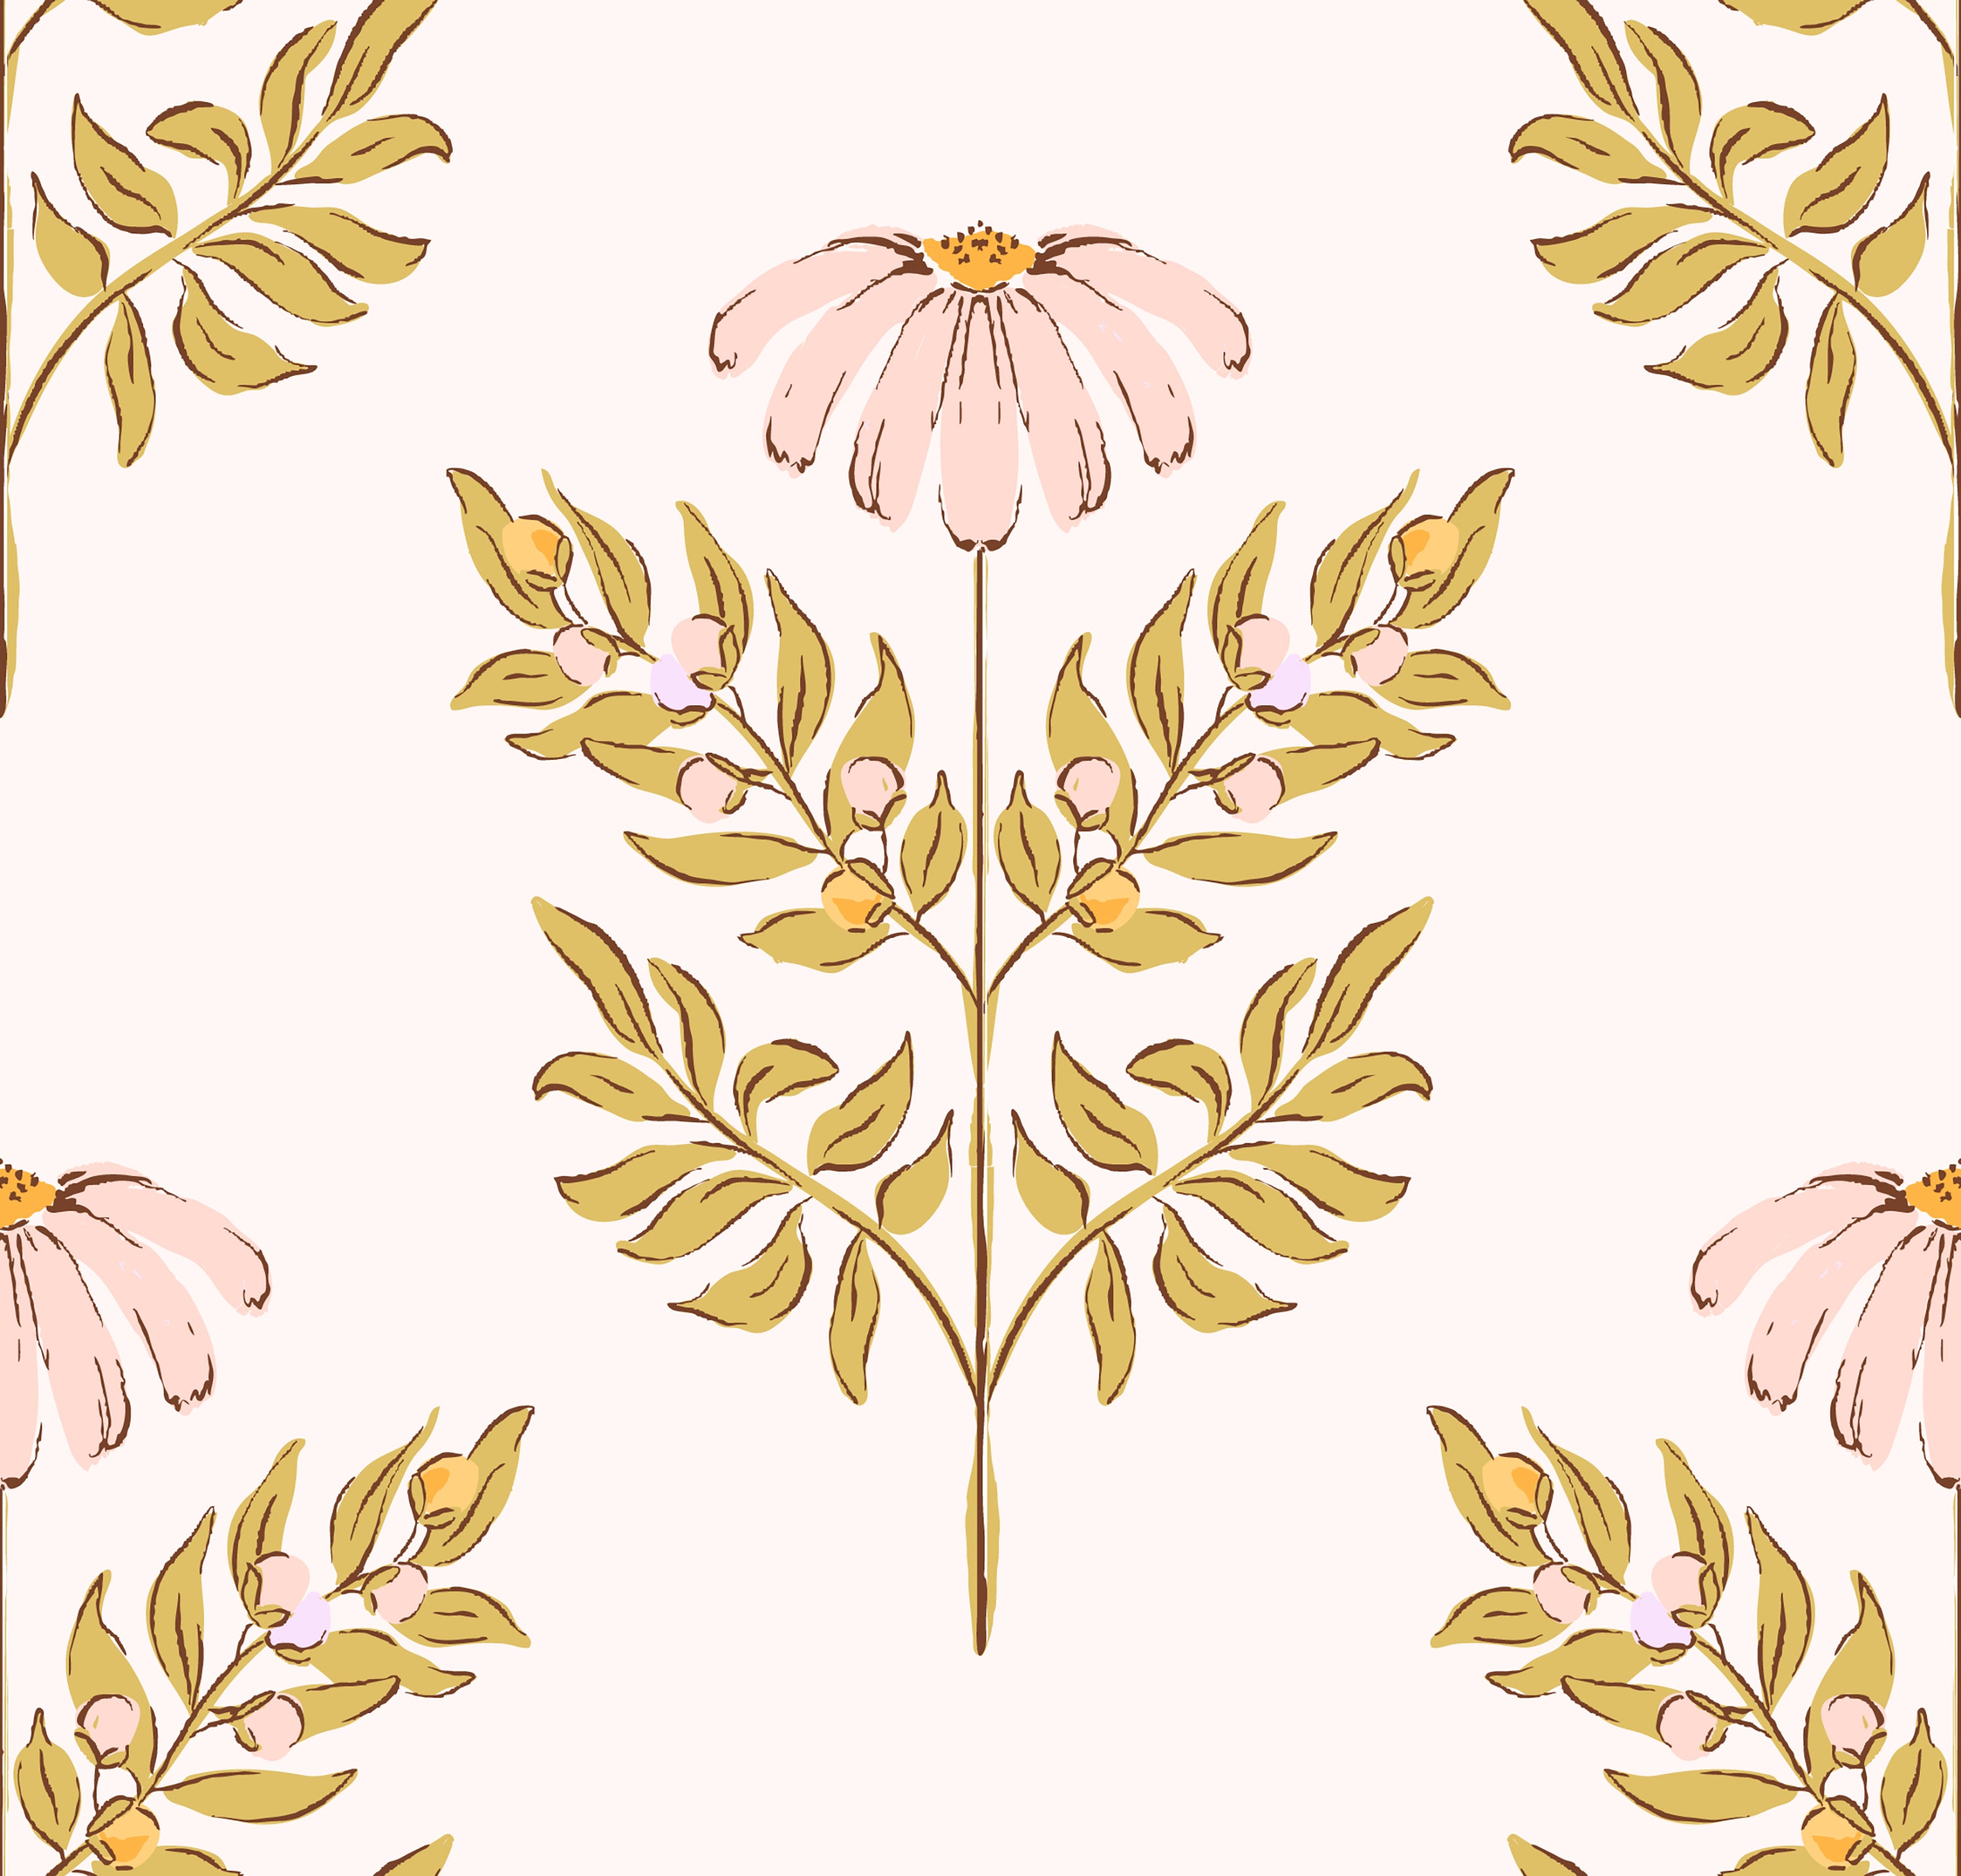 Close-up view of the Ditsy Daisy Wallpaper - Small, showcasing intricate small pink daisies surrounded by delicate golden leaves on a light base. This wallpaper offers a subtle yet charming floral motif that brightens any room.